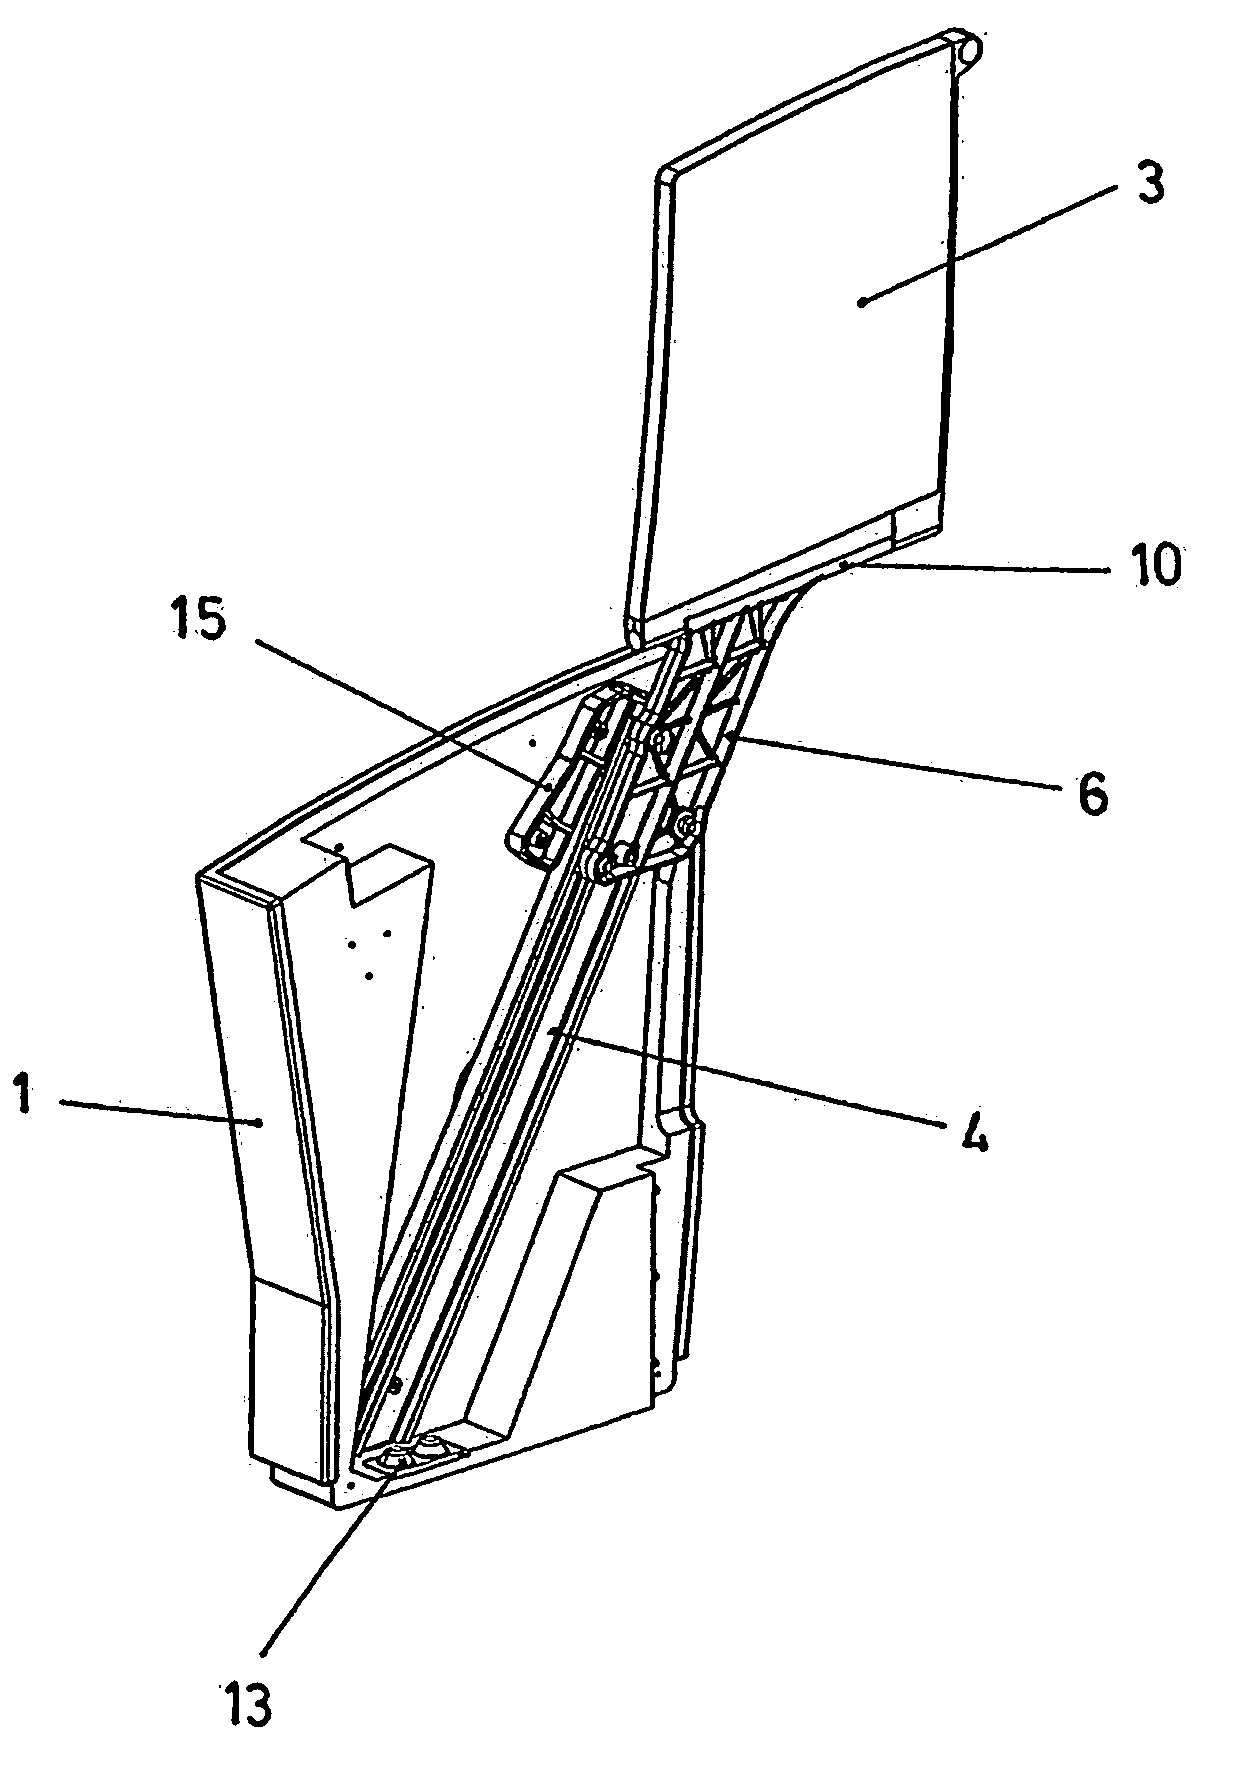 Improvements to a System for Mounting Writing Tablets to Armchairs